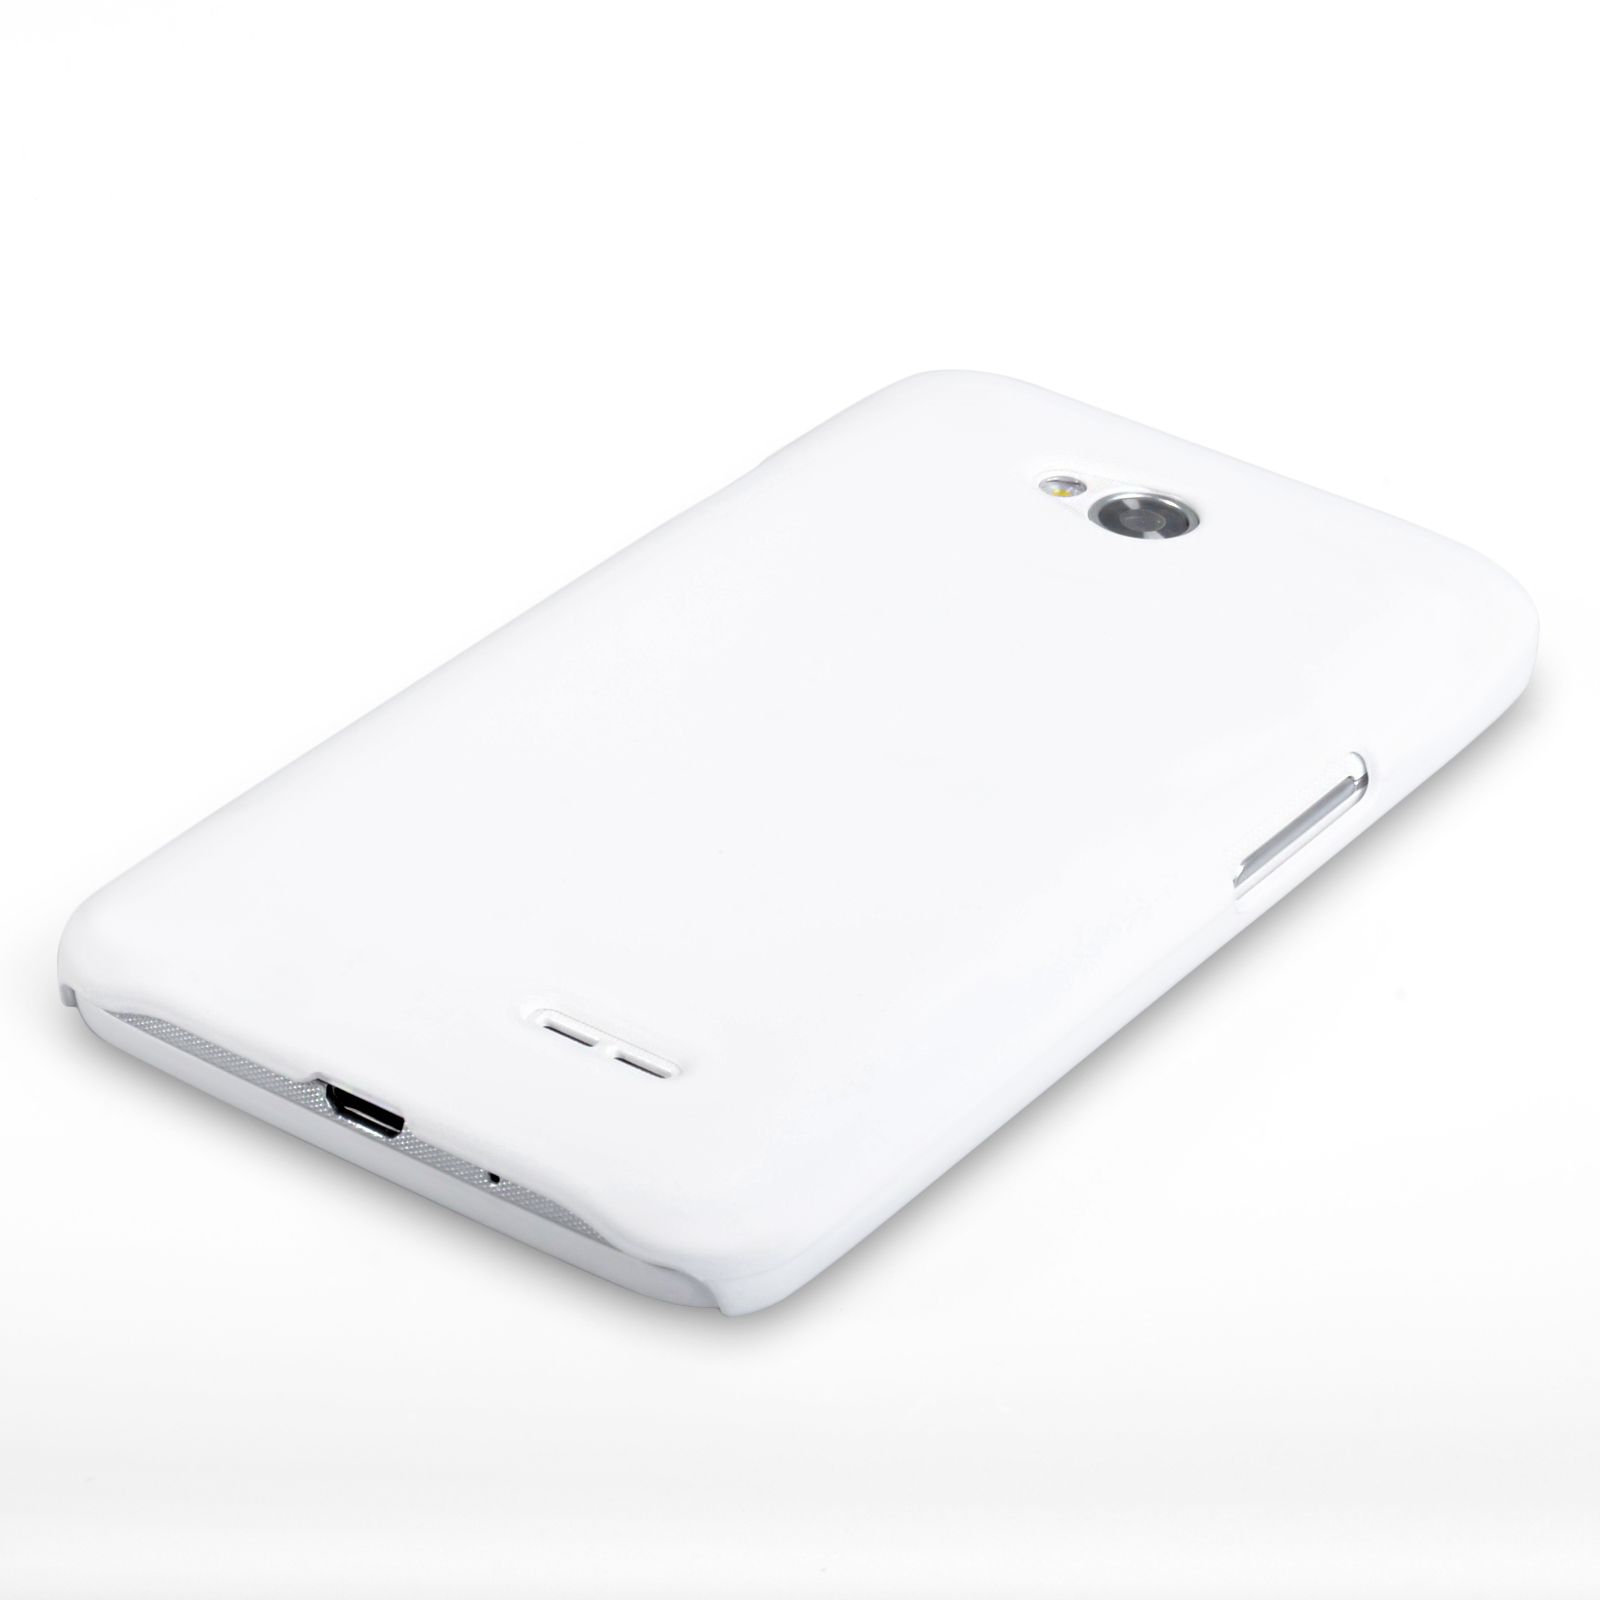 YouSave Accessories LG L70 Hard Hybrid Case - White